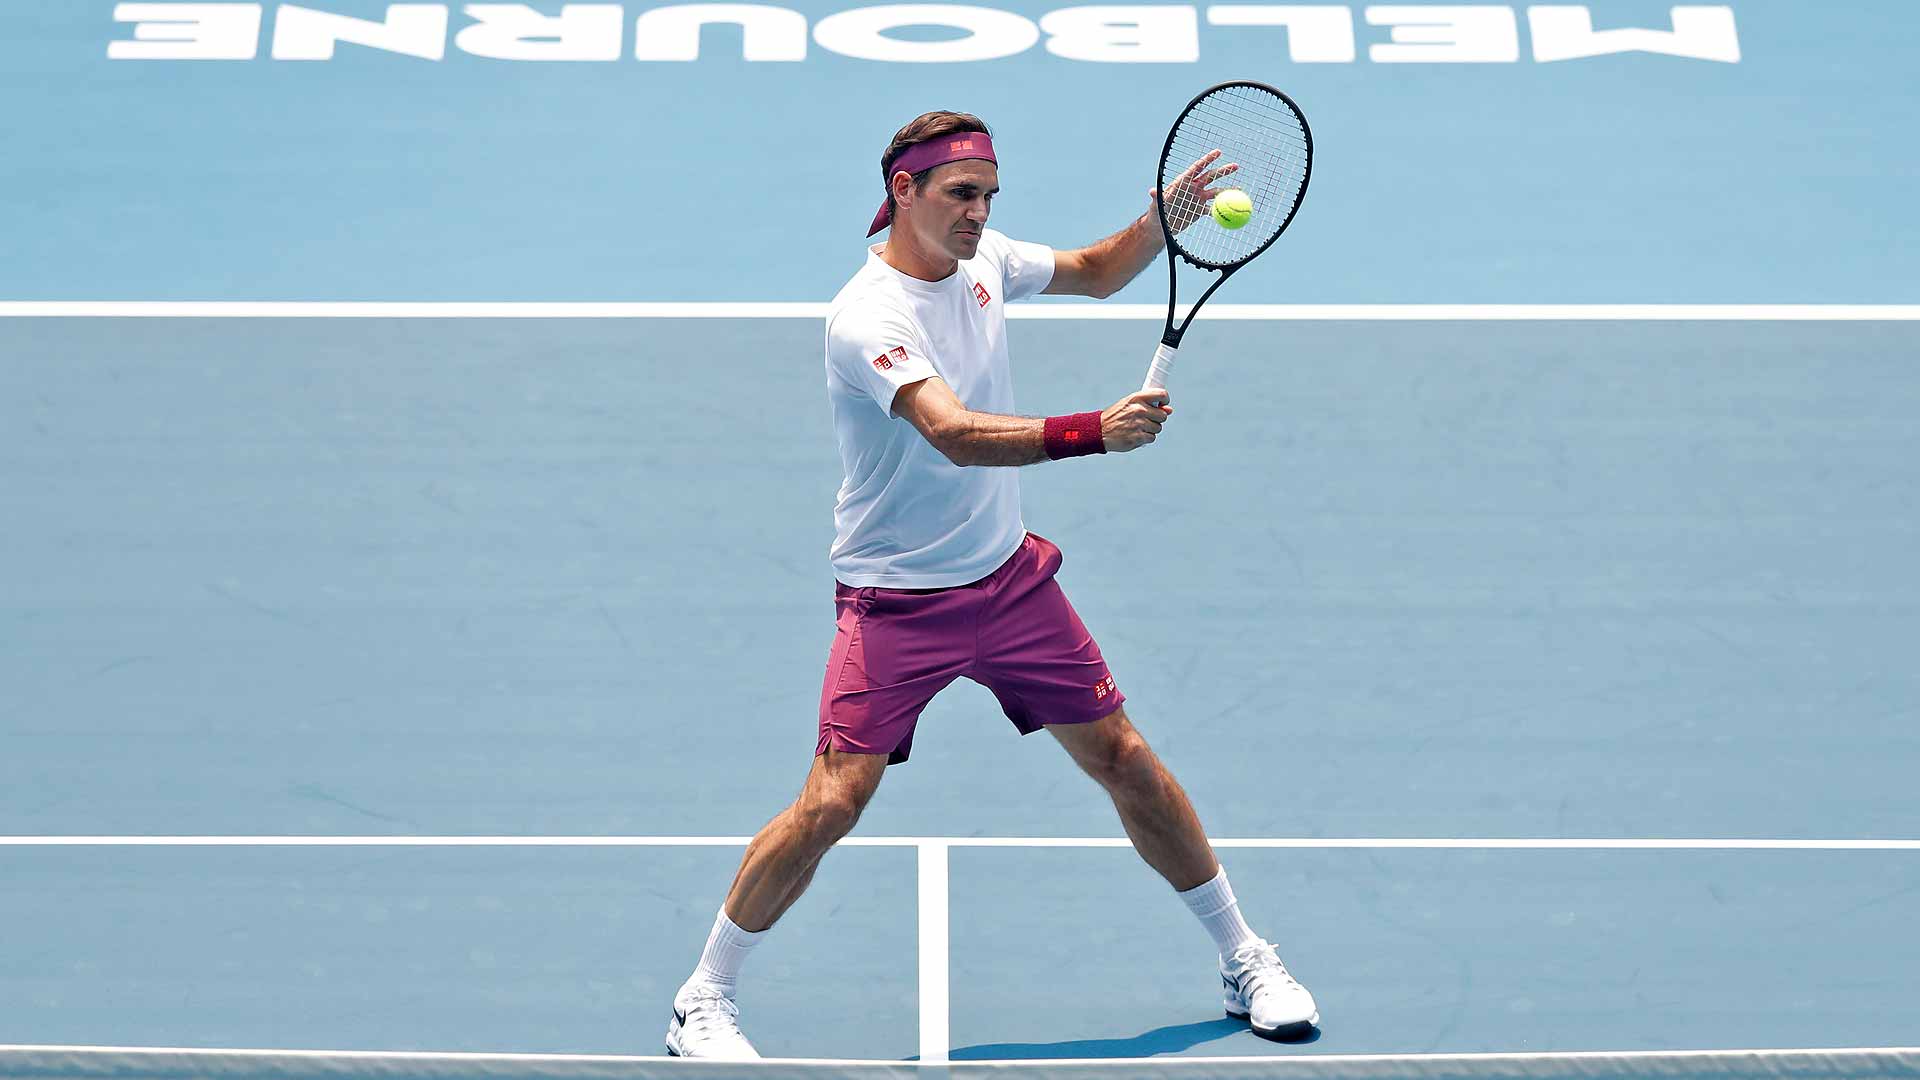 Roger Federer will pursue his third Australian Open title in four years.